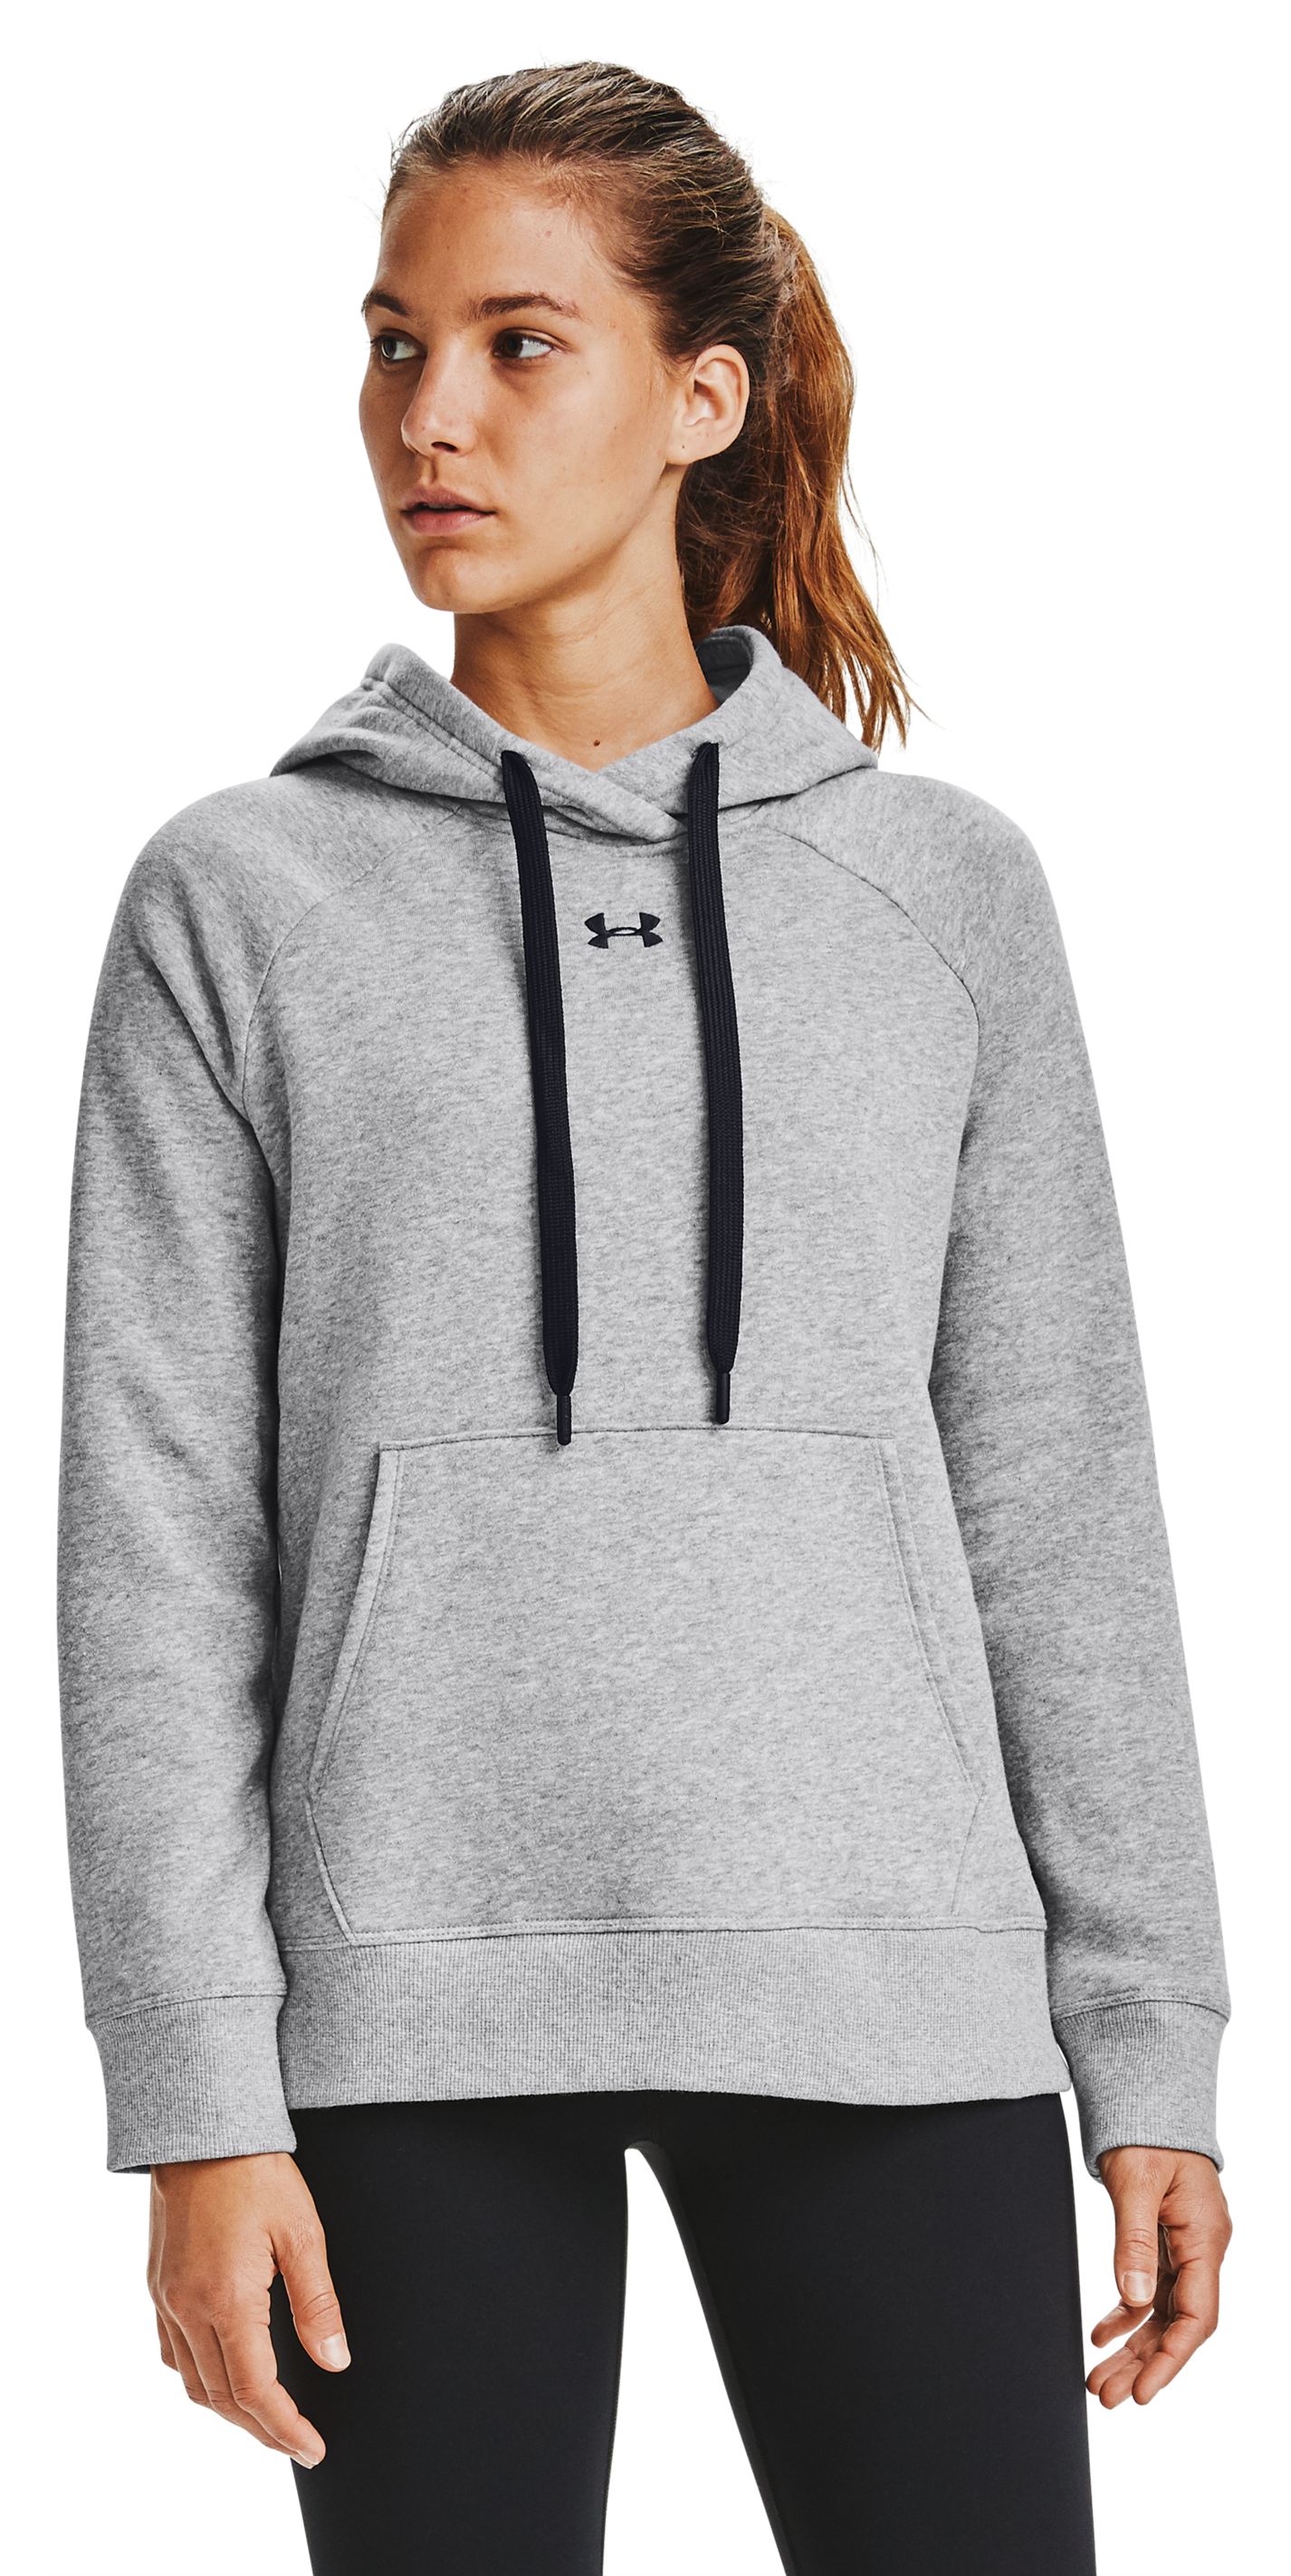 Under Armour Rival Fleece HB Long-Sleeve Hoodie for Ladies | Bass Pro Shops